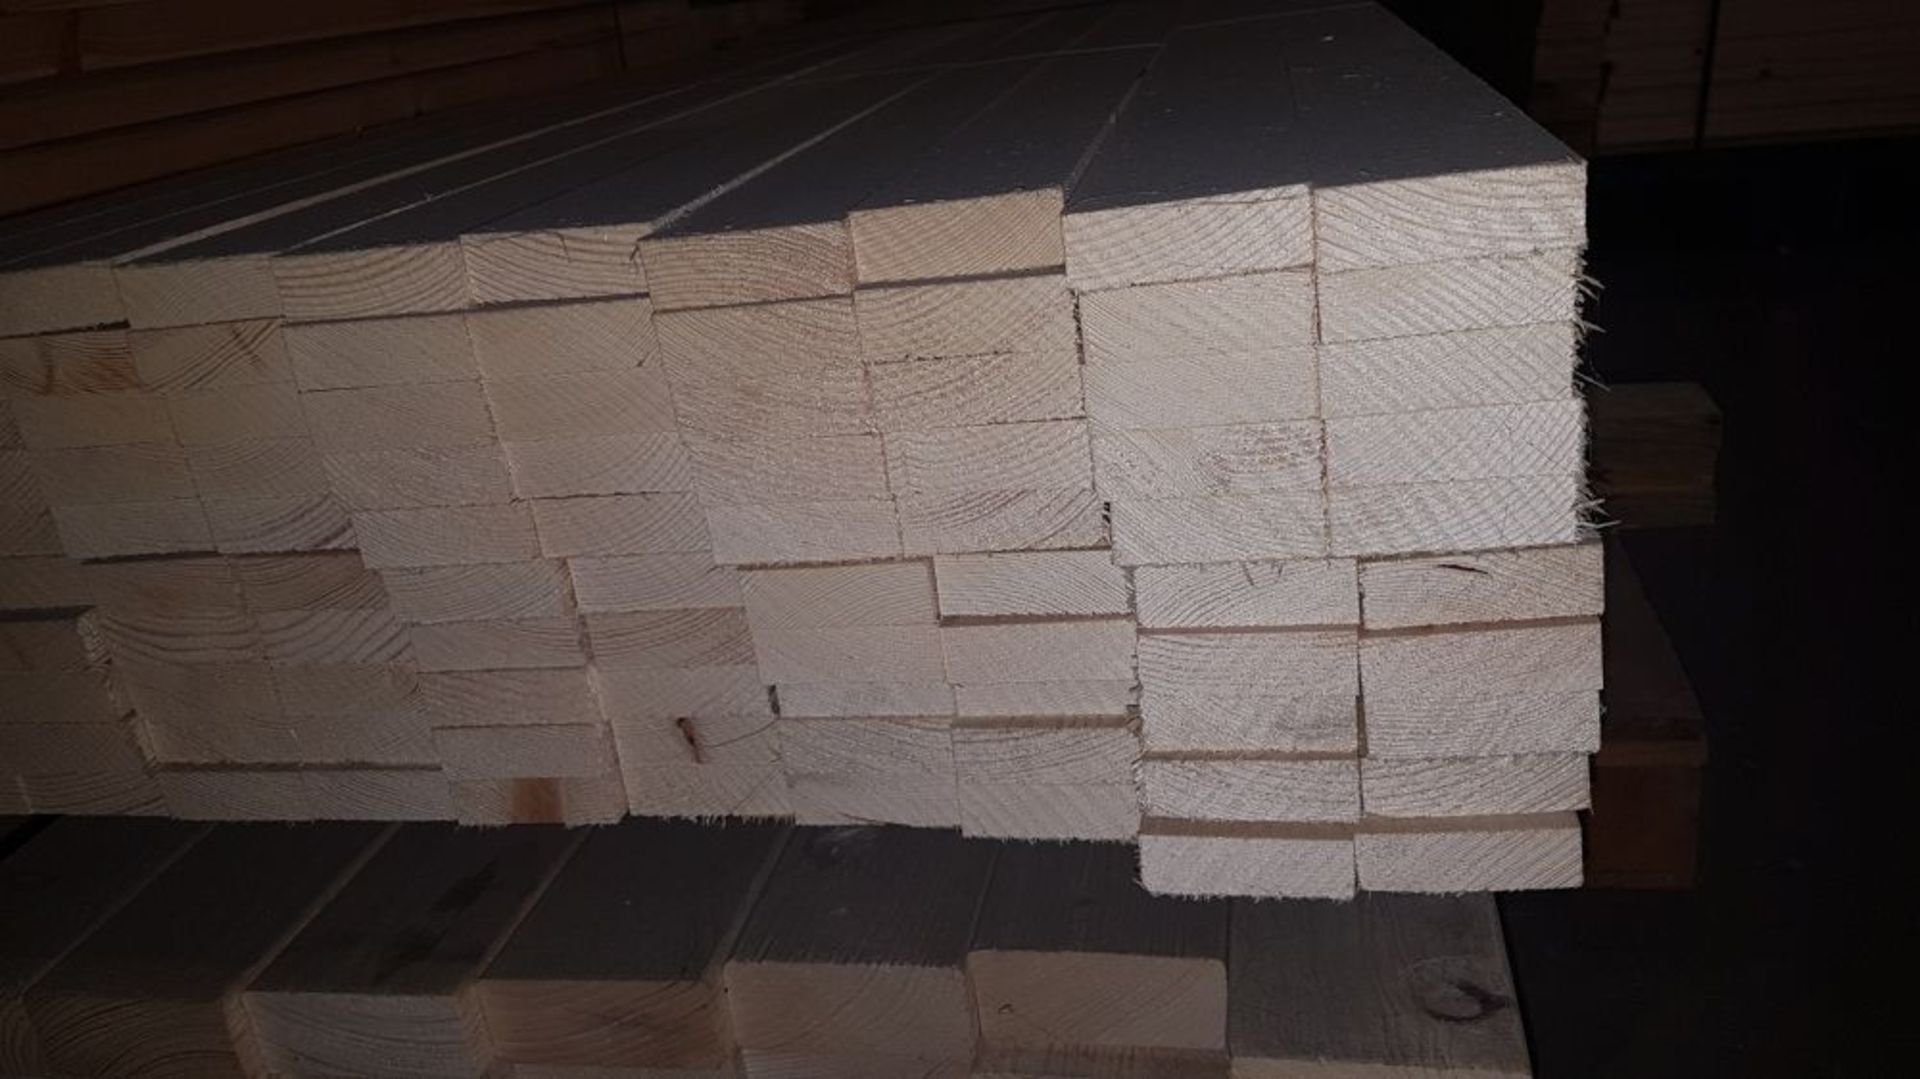 * 22x63 (20x60), planed square edged, 100 pieces @ 1936mm. MX0425. Please note this lot is located